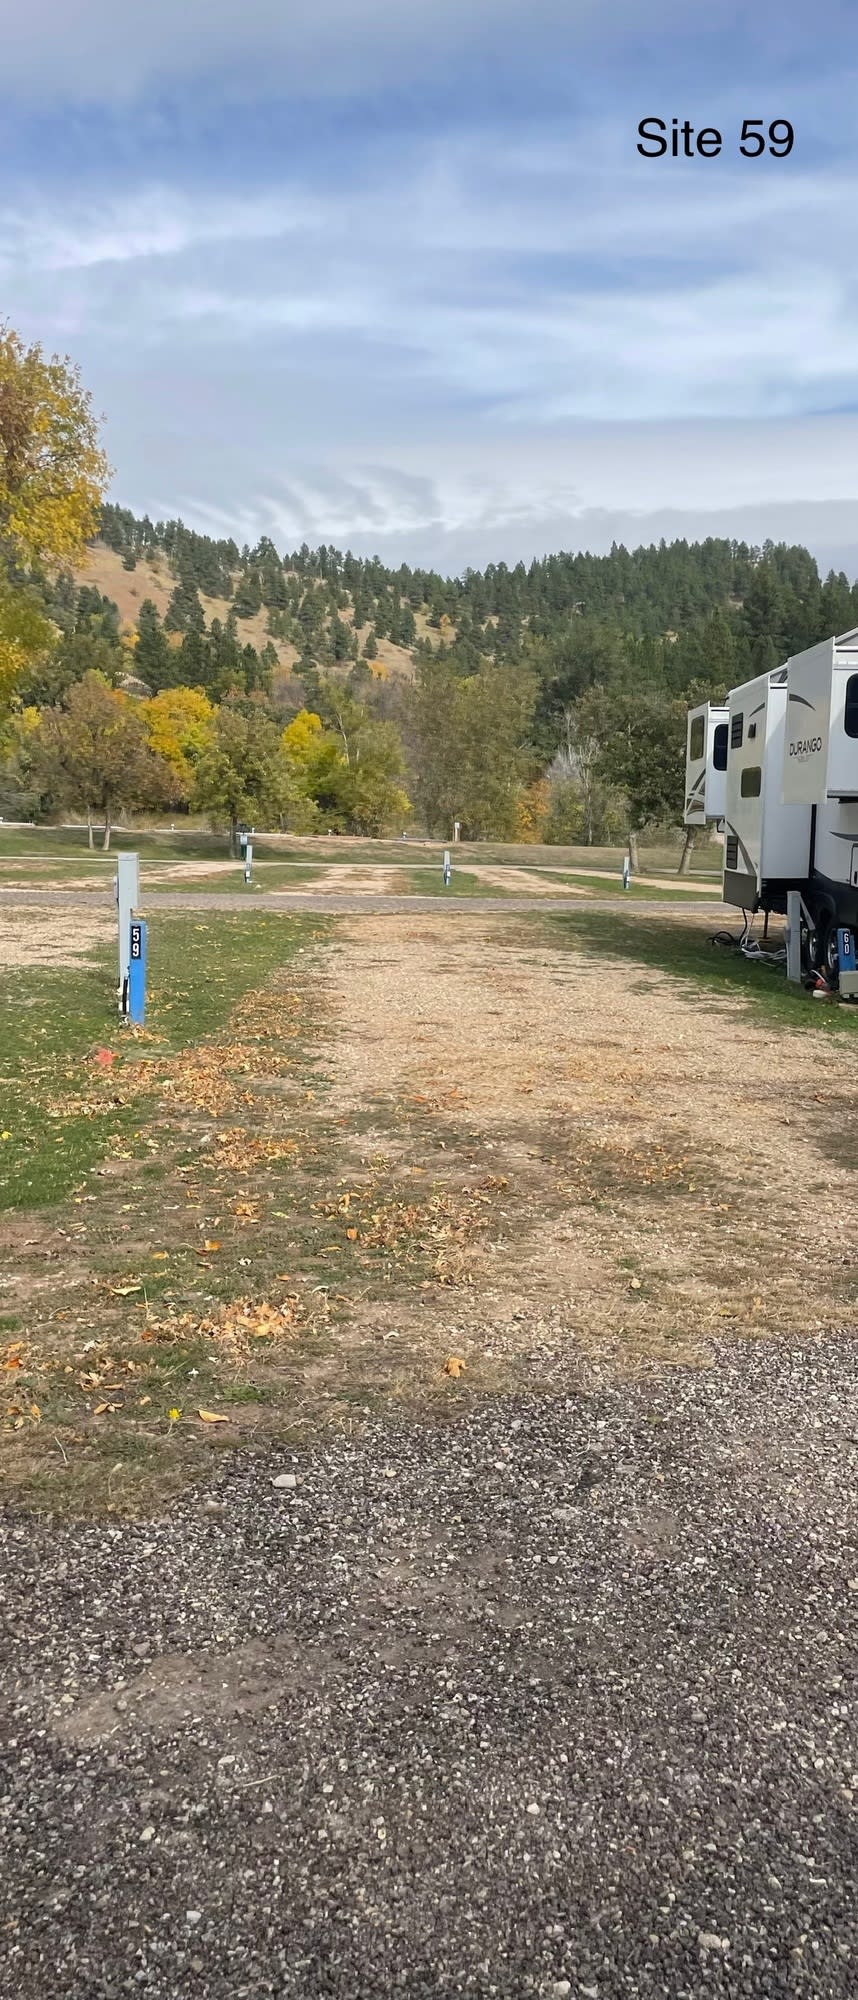 Day's End Campground